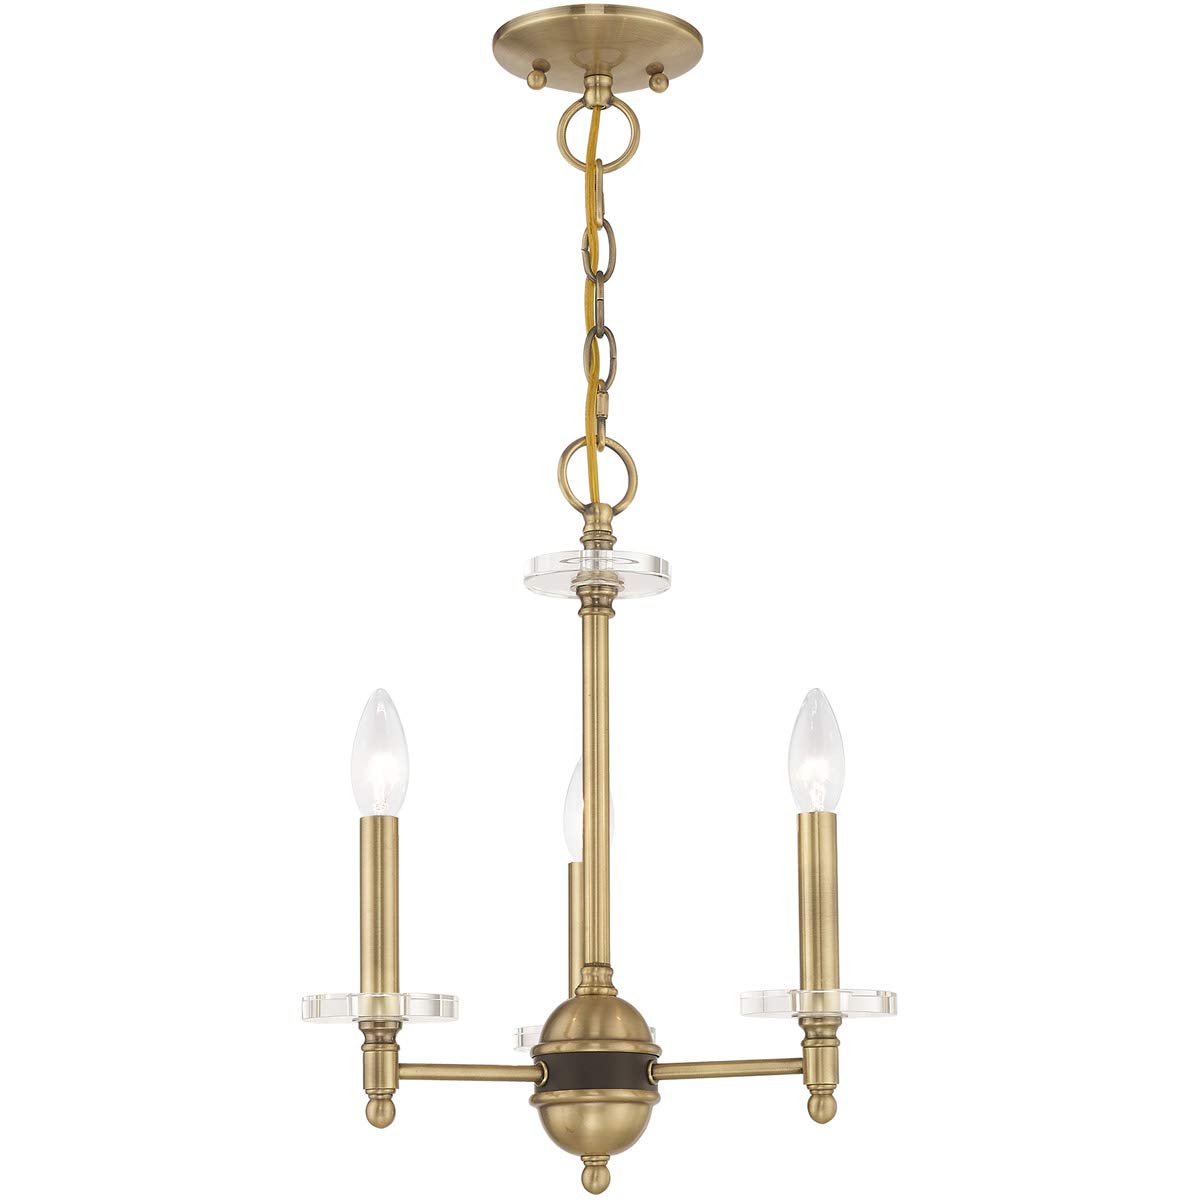 Livex Lighting 42703-01 Bancroft - Three Light Mini Chandelier, Antique Brass Finish with Clear Bobeche Crystal